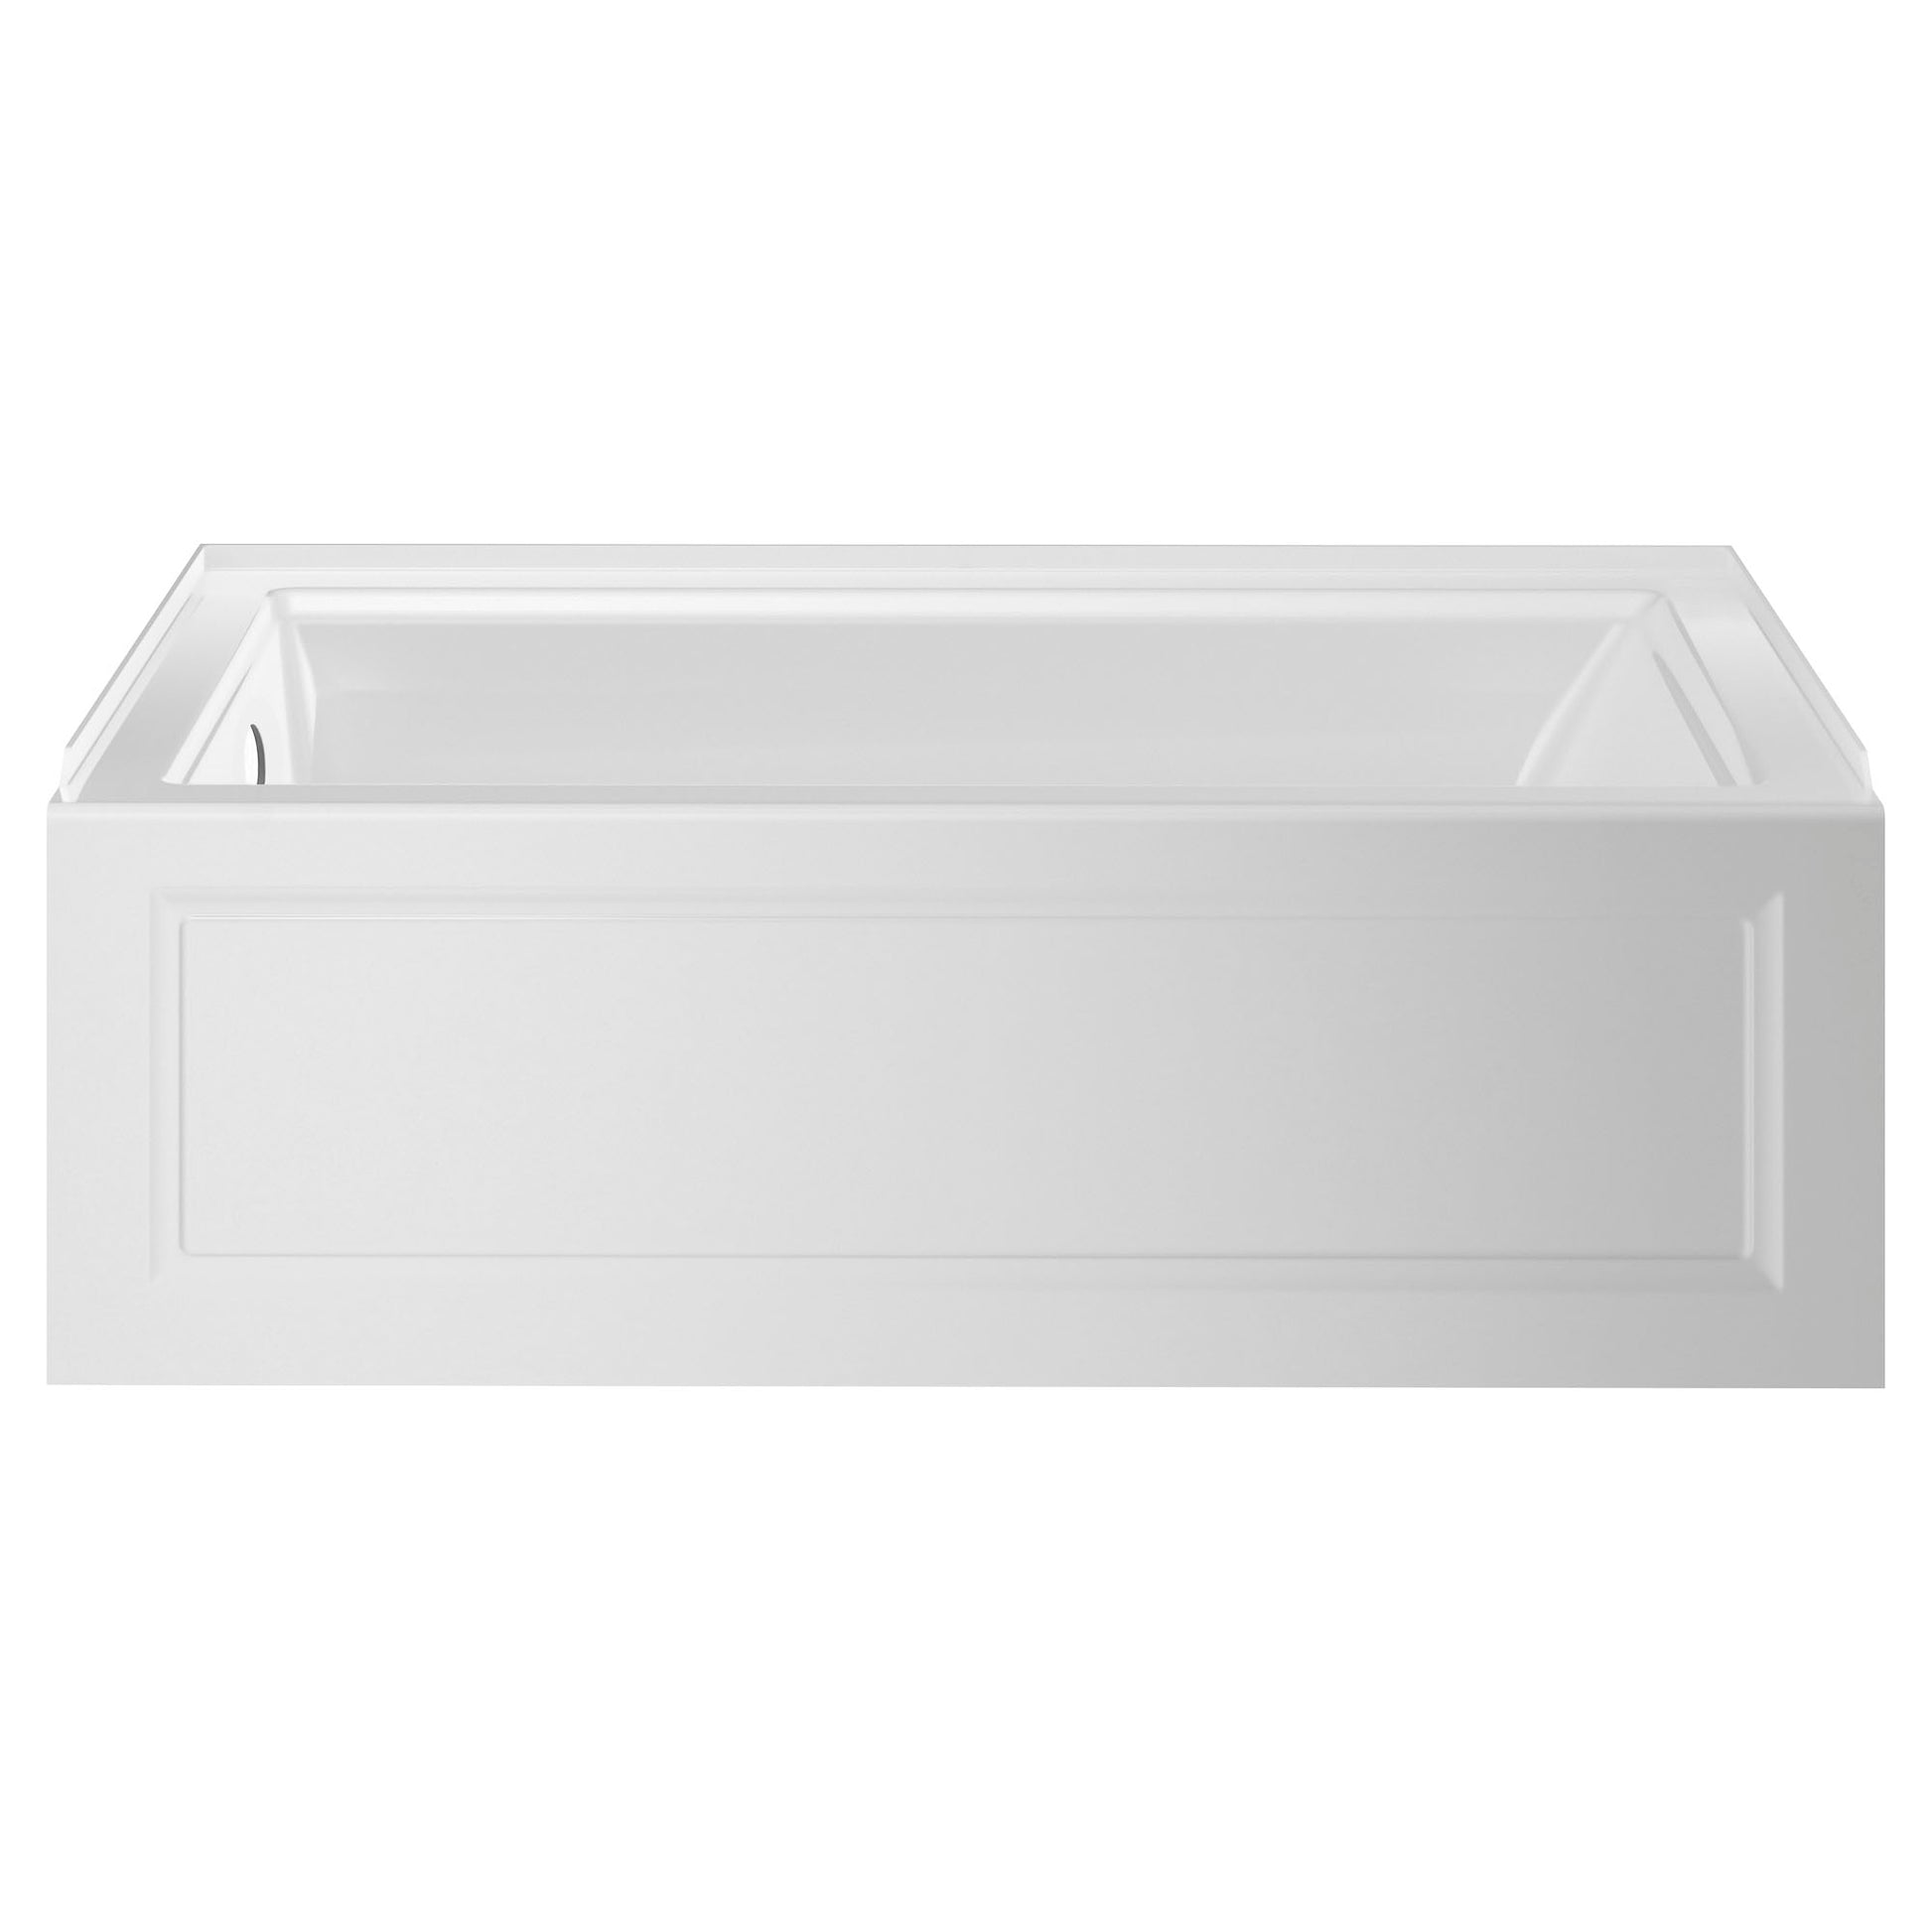 AMERICAN-STANDARD 2545202.020, Town Square S 60 x 30-Inch Integral Apron Bathtub With Left-Hand Outlet in White